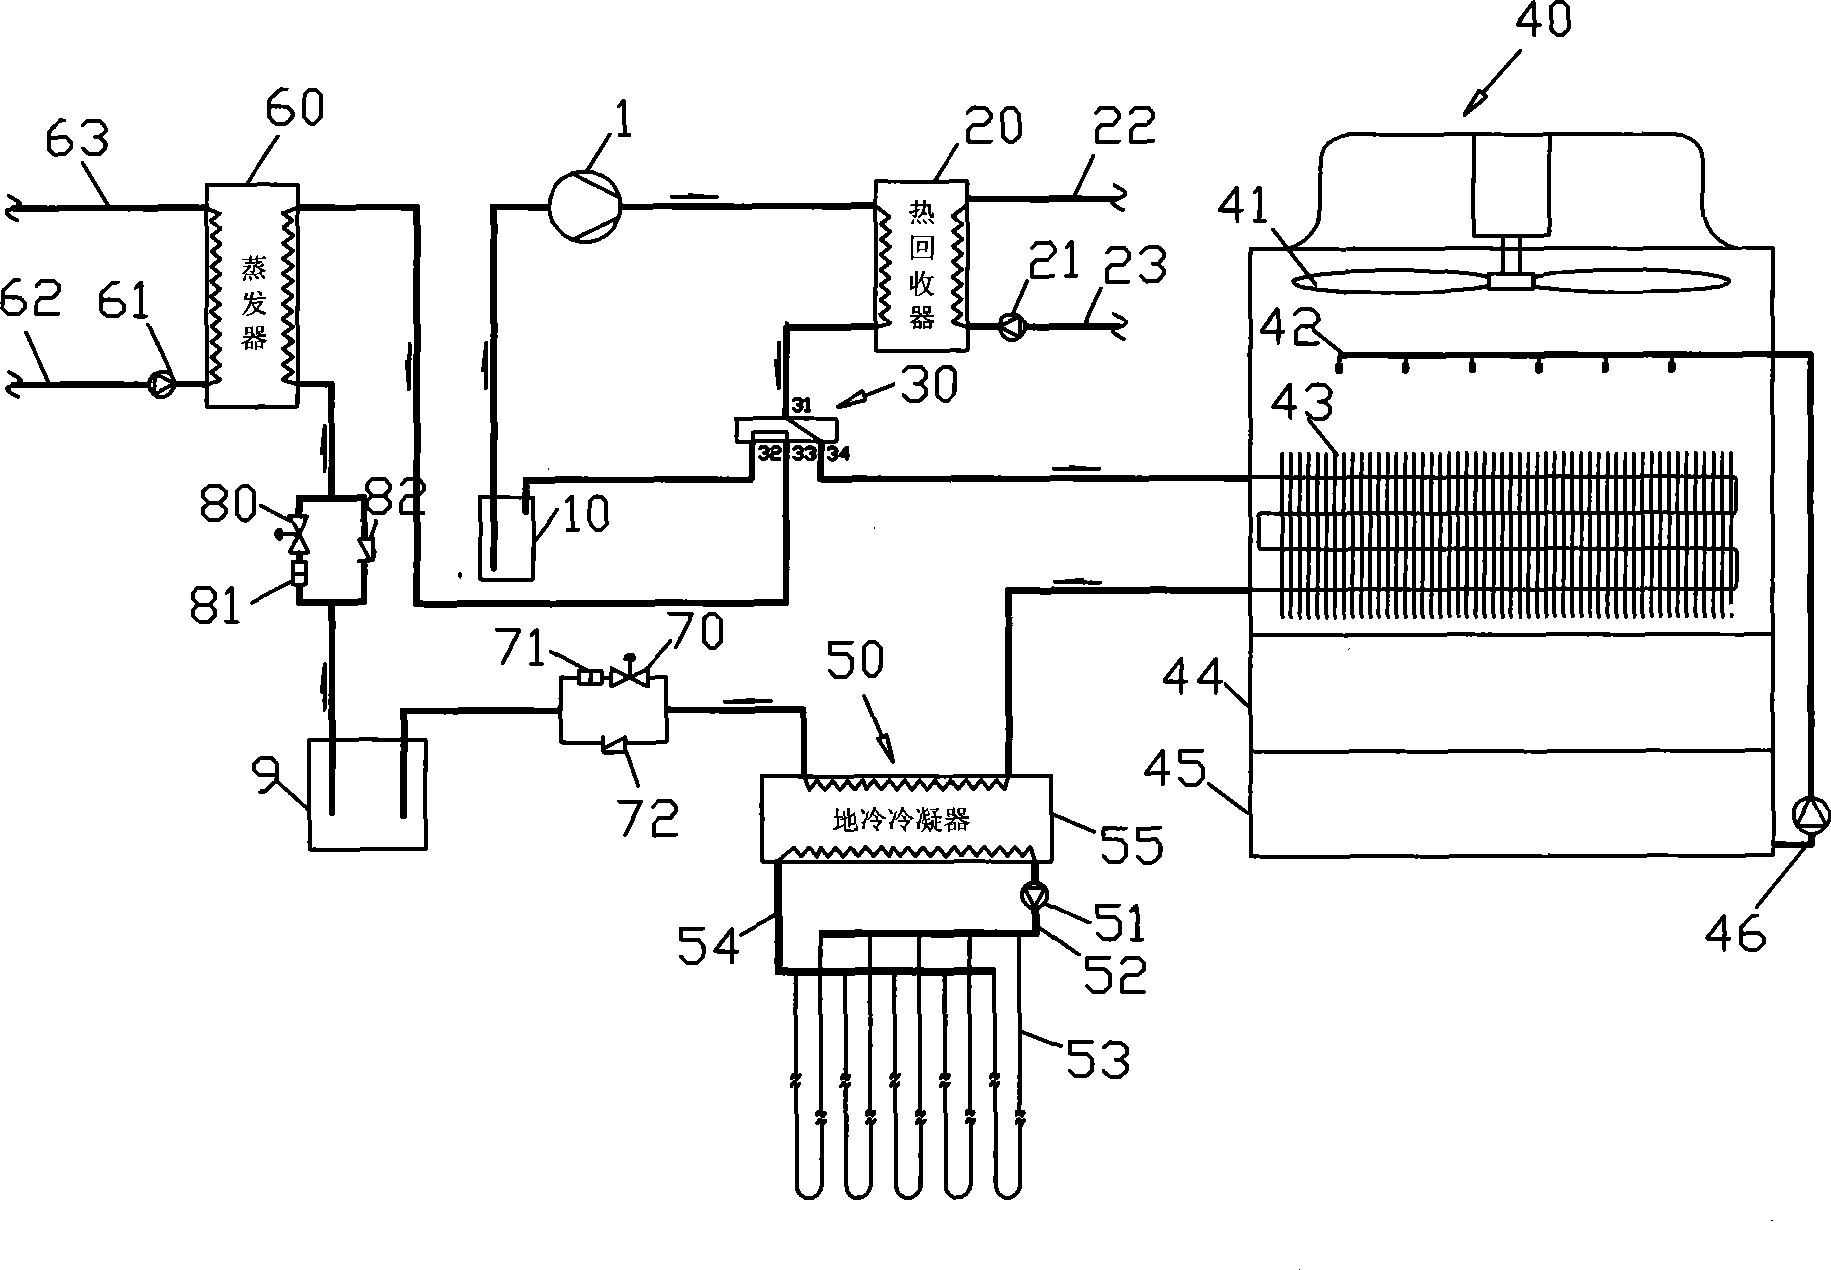 Composite multi-source central air-conditioning machine set using geothermal energy